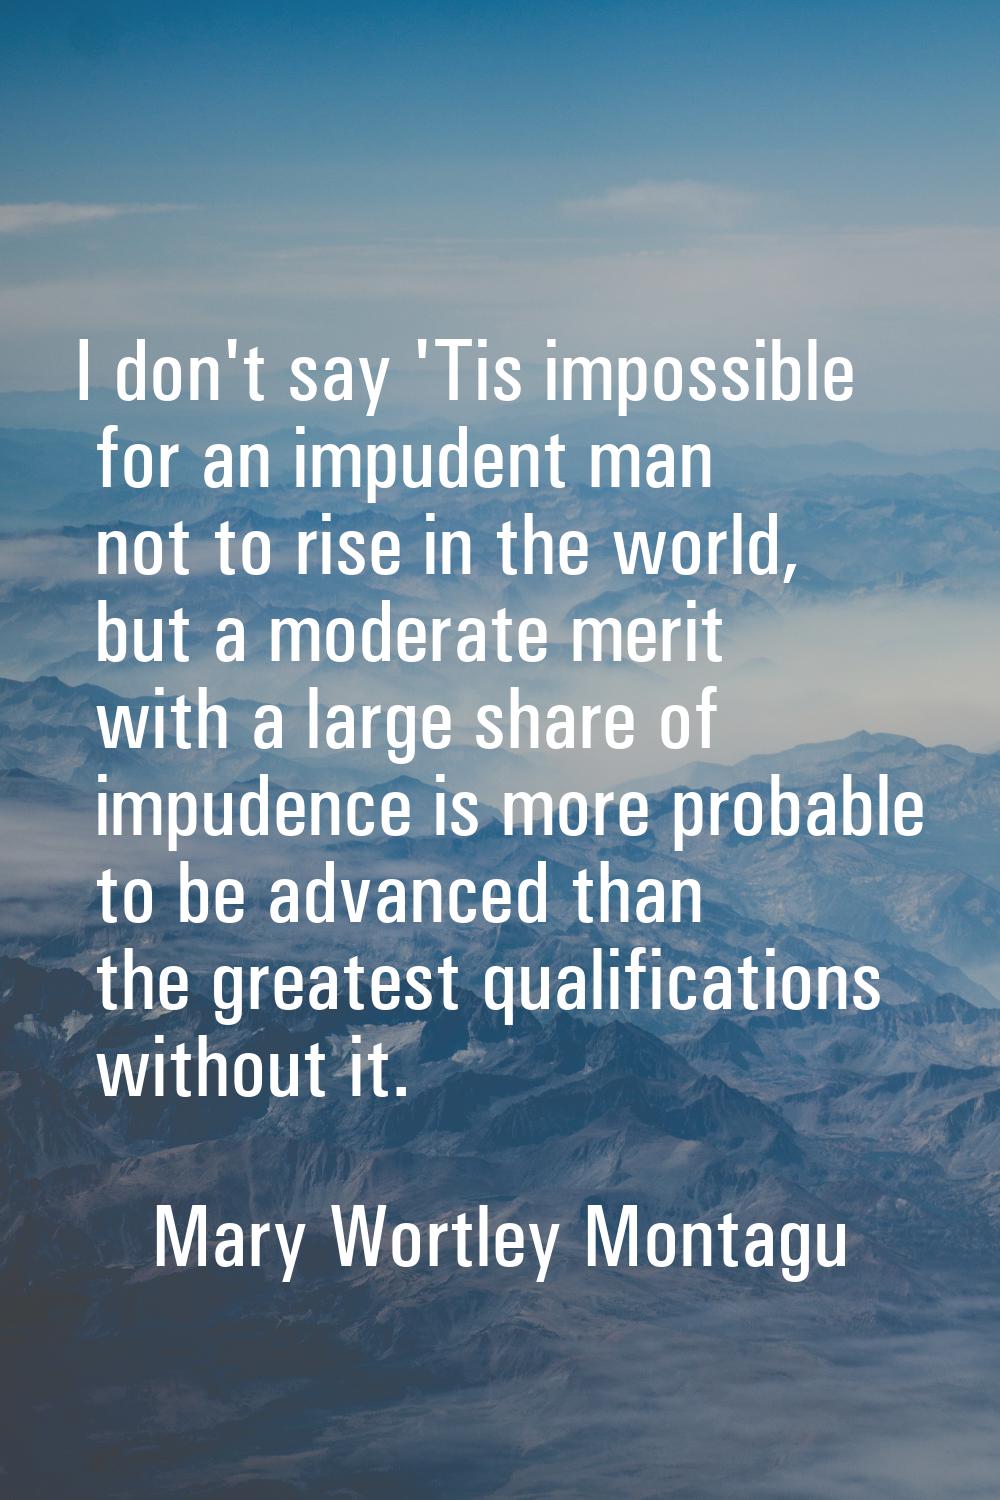 I don't say 'Tis impossible for an impudent man not to rise in the world, but a moderate merit with